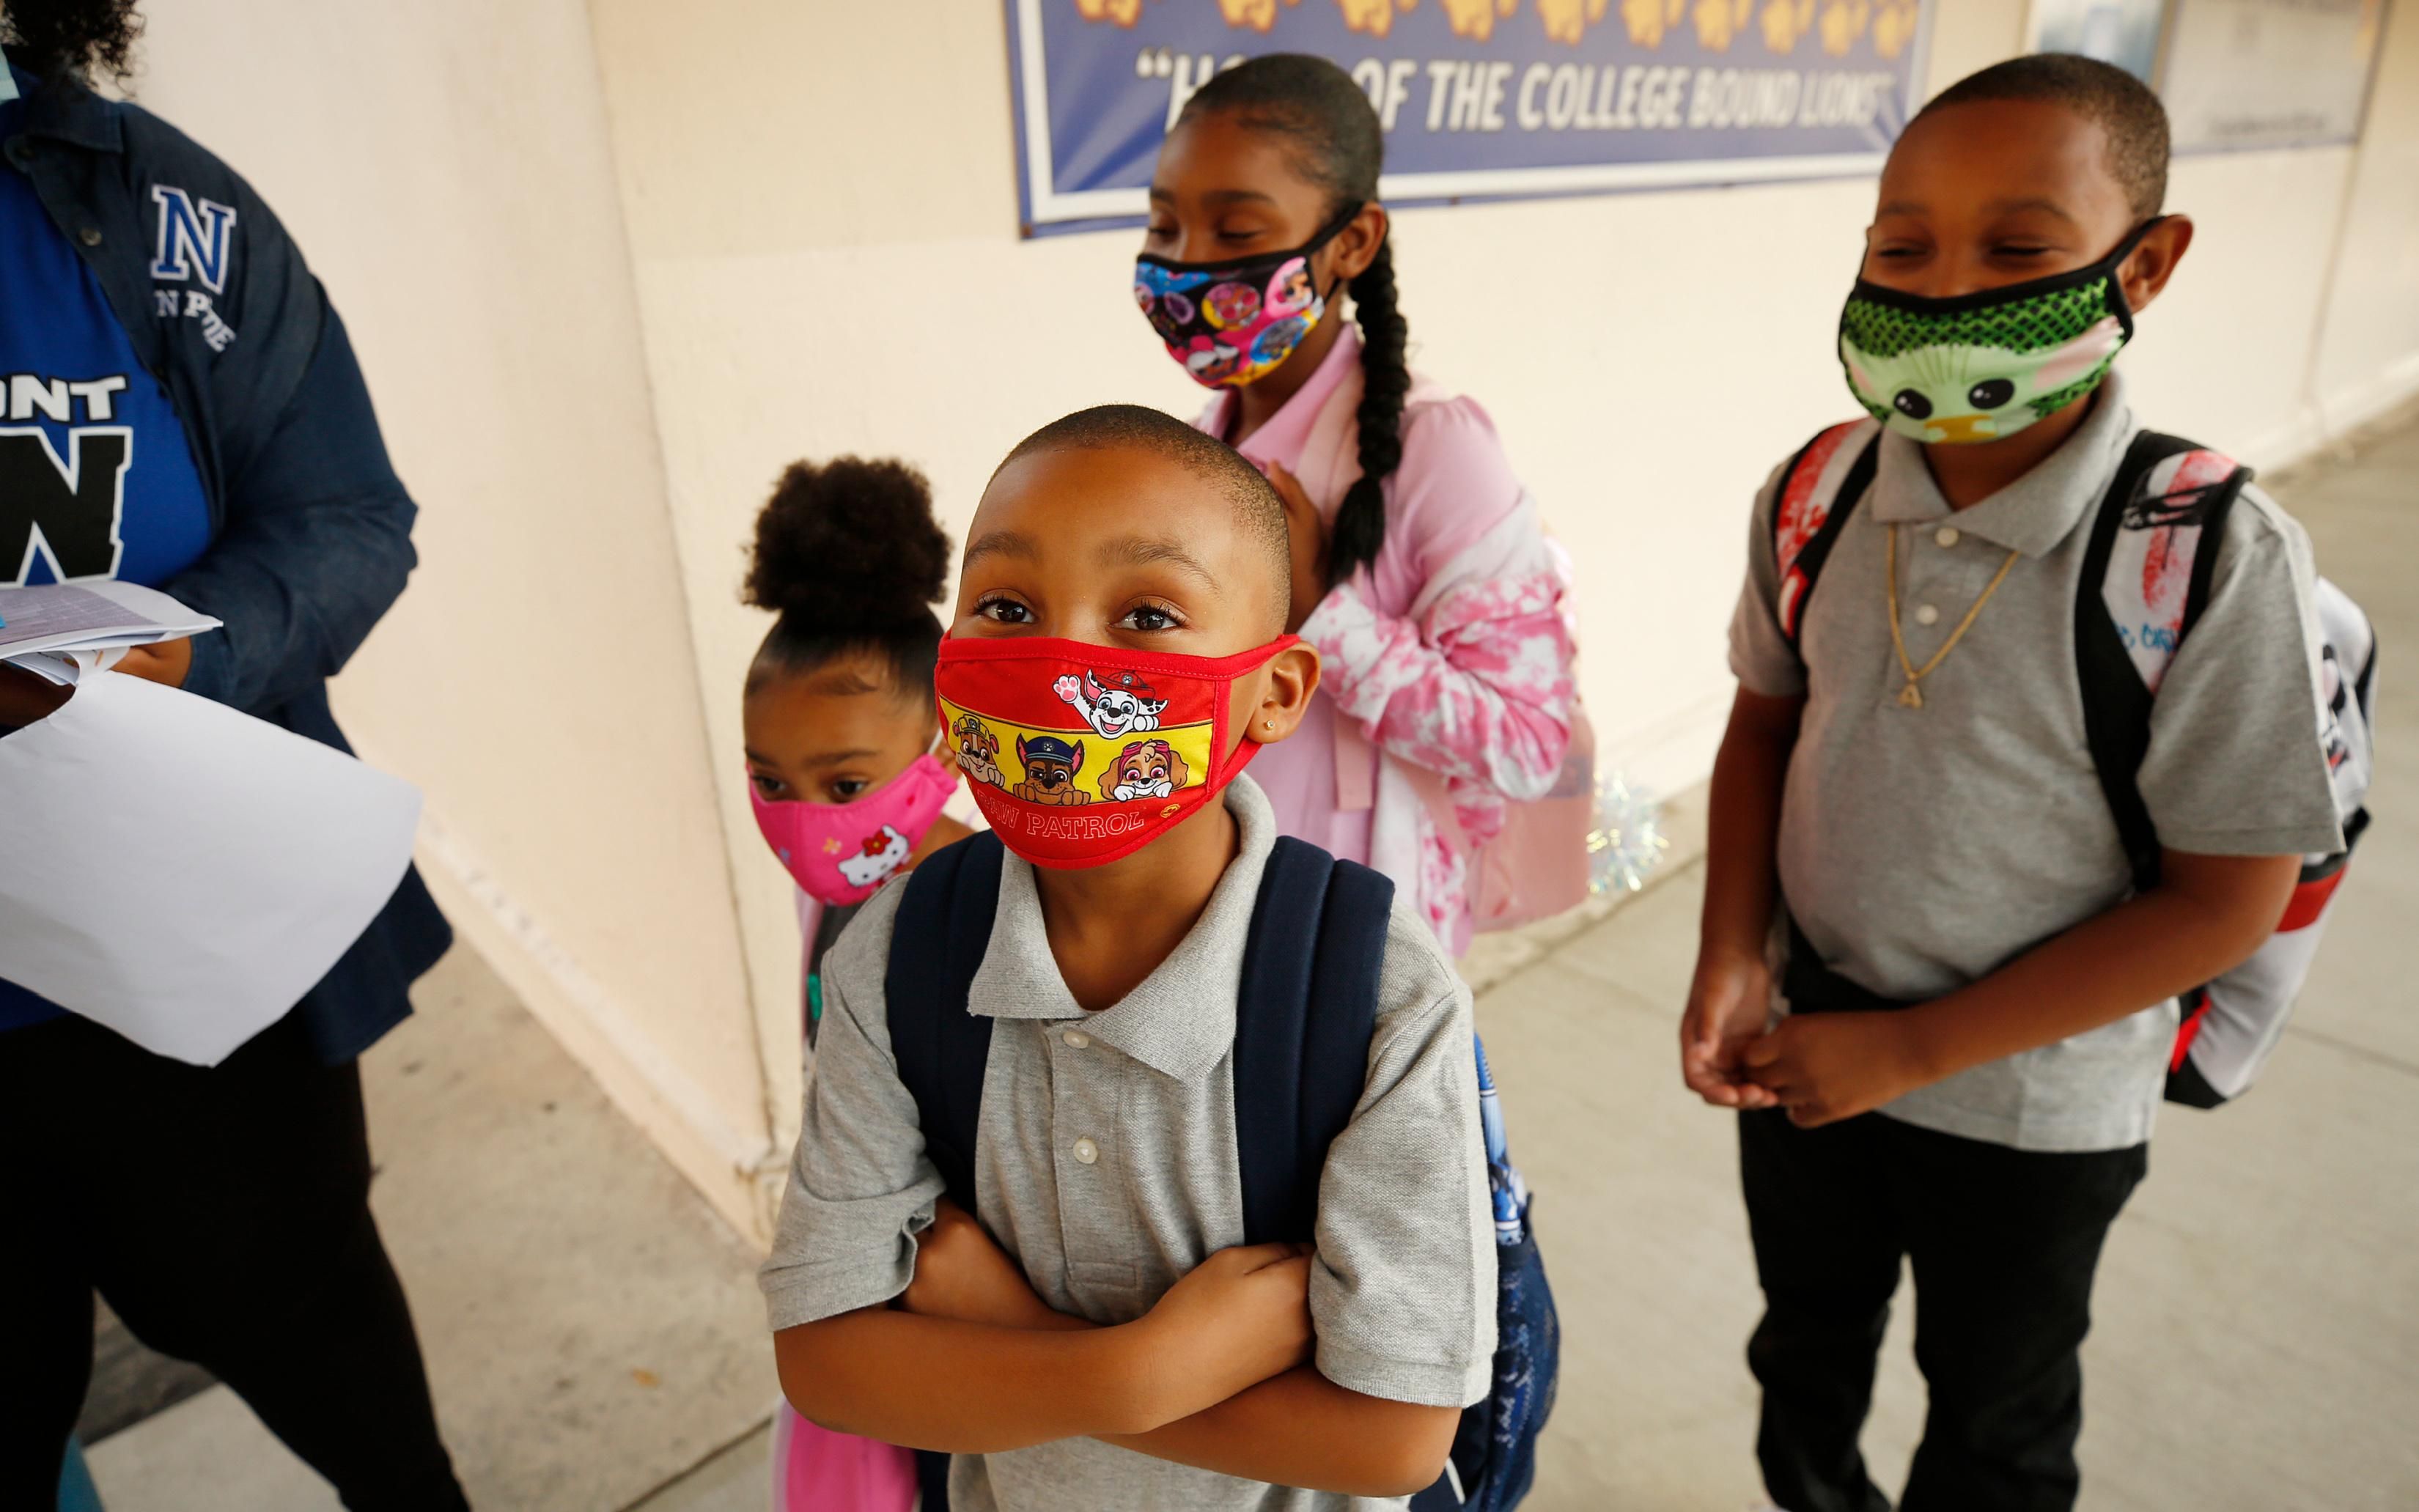 Students make their way to the front door of Normont Elementary School in Harbor City, California on the first day of in-person instruction on August 16, 2021. (Photo: Al Seib/Los Angeles Times via Getty Images)